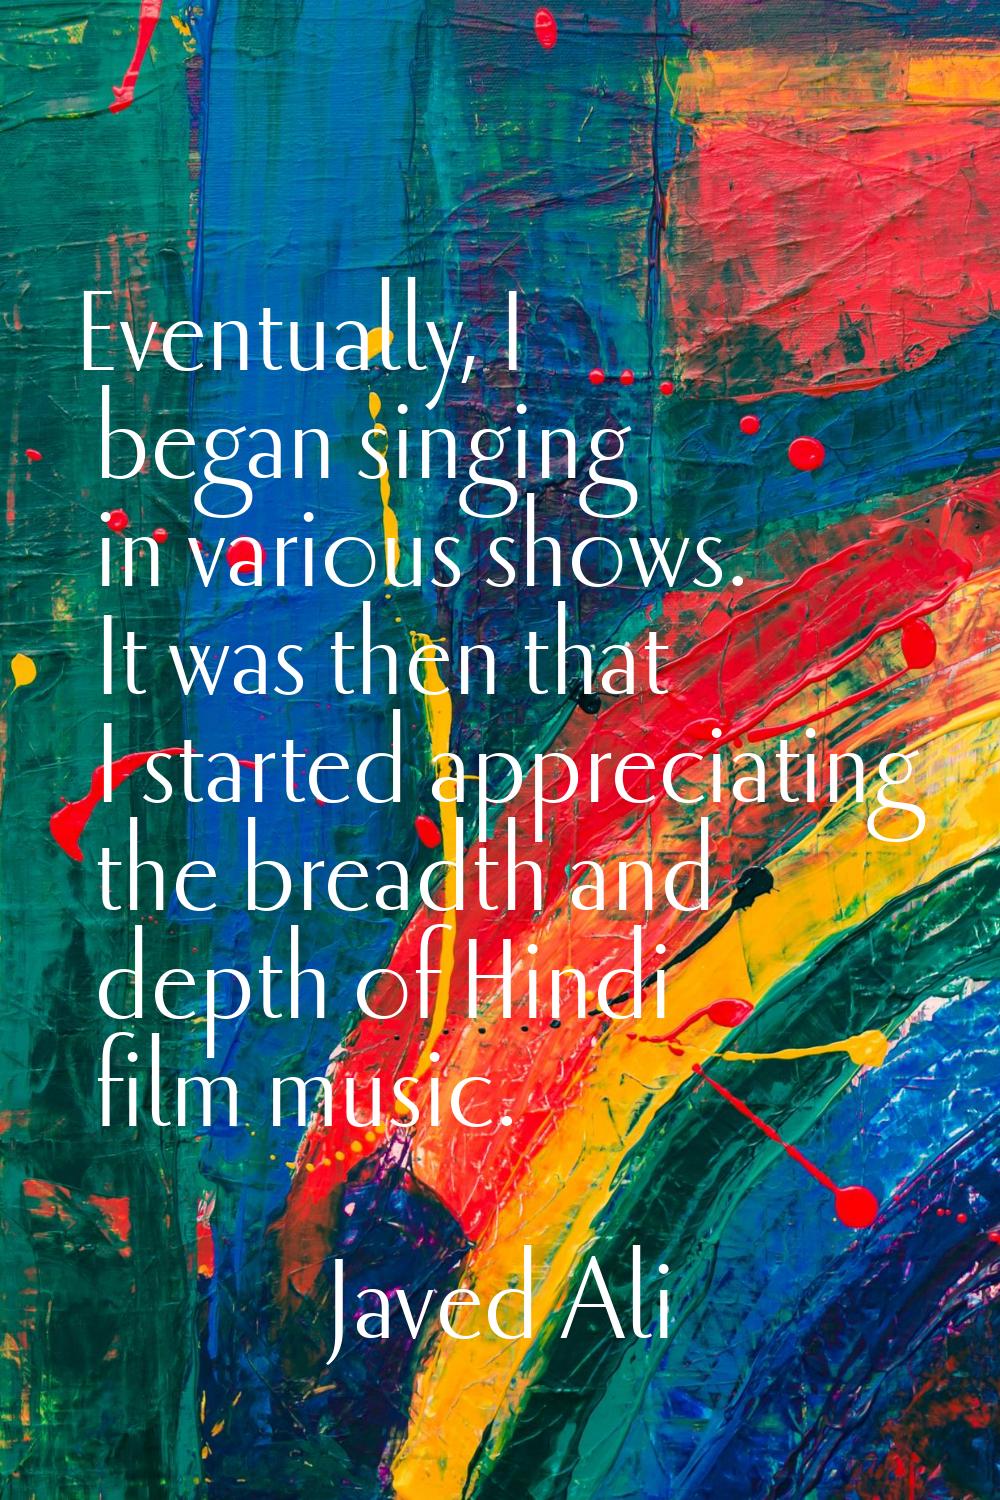 Eventually, I began singing in various shows. It was then that I started appreciating the breadth a